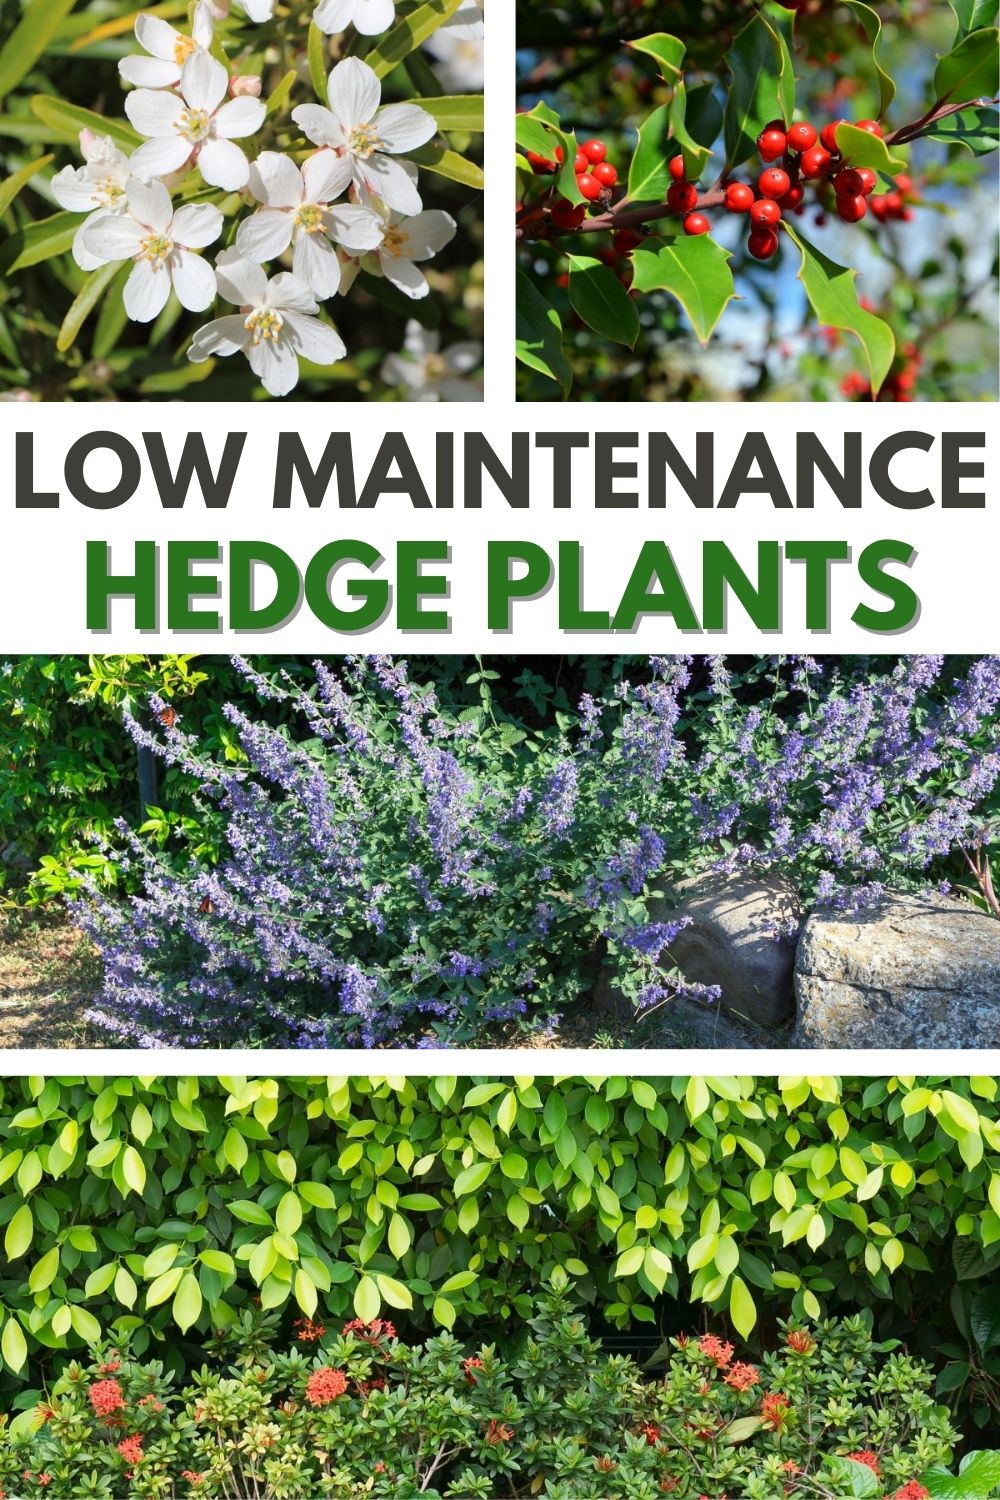 If you want an easy way to make a natural barrier around your home or garden, look no further than fast growing low maintenance hedge plants! #fastgrowinglowmaintenancehedgeplants #fastgrowing #lowmaintenance #hedgeplants #fastgrowinghedges via @wondermomwannab